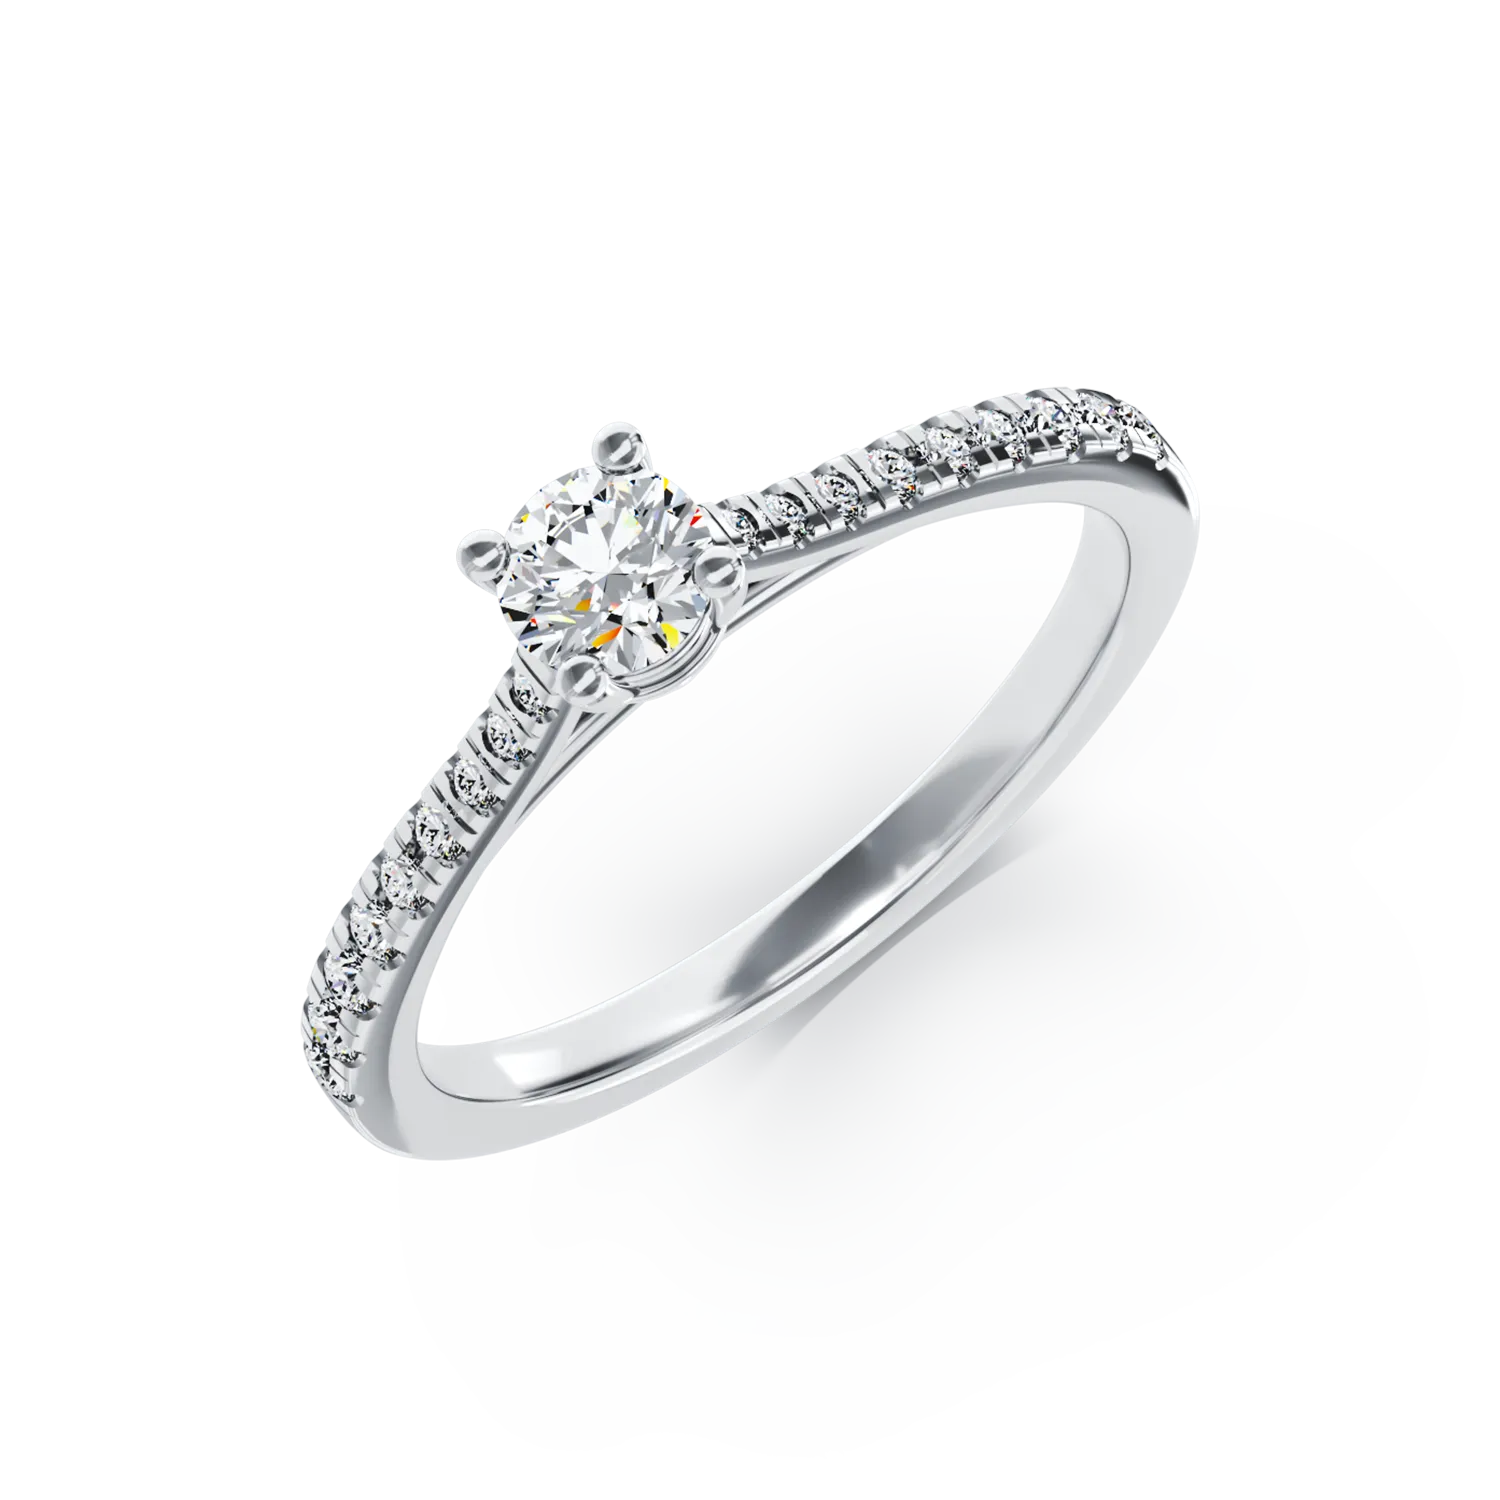 18K white gold engagement ring with diamond of 0.24ct and diamonds of 0.19ct